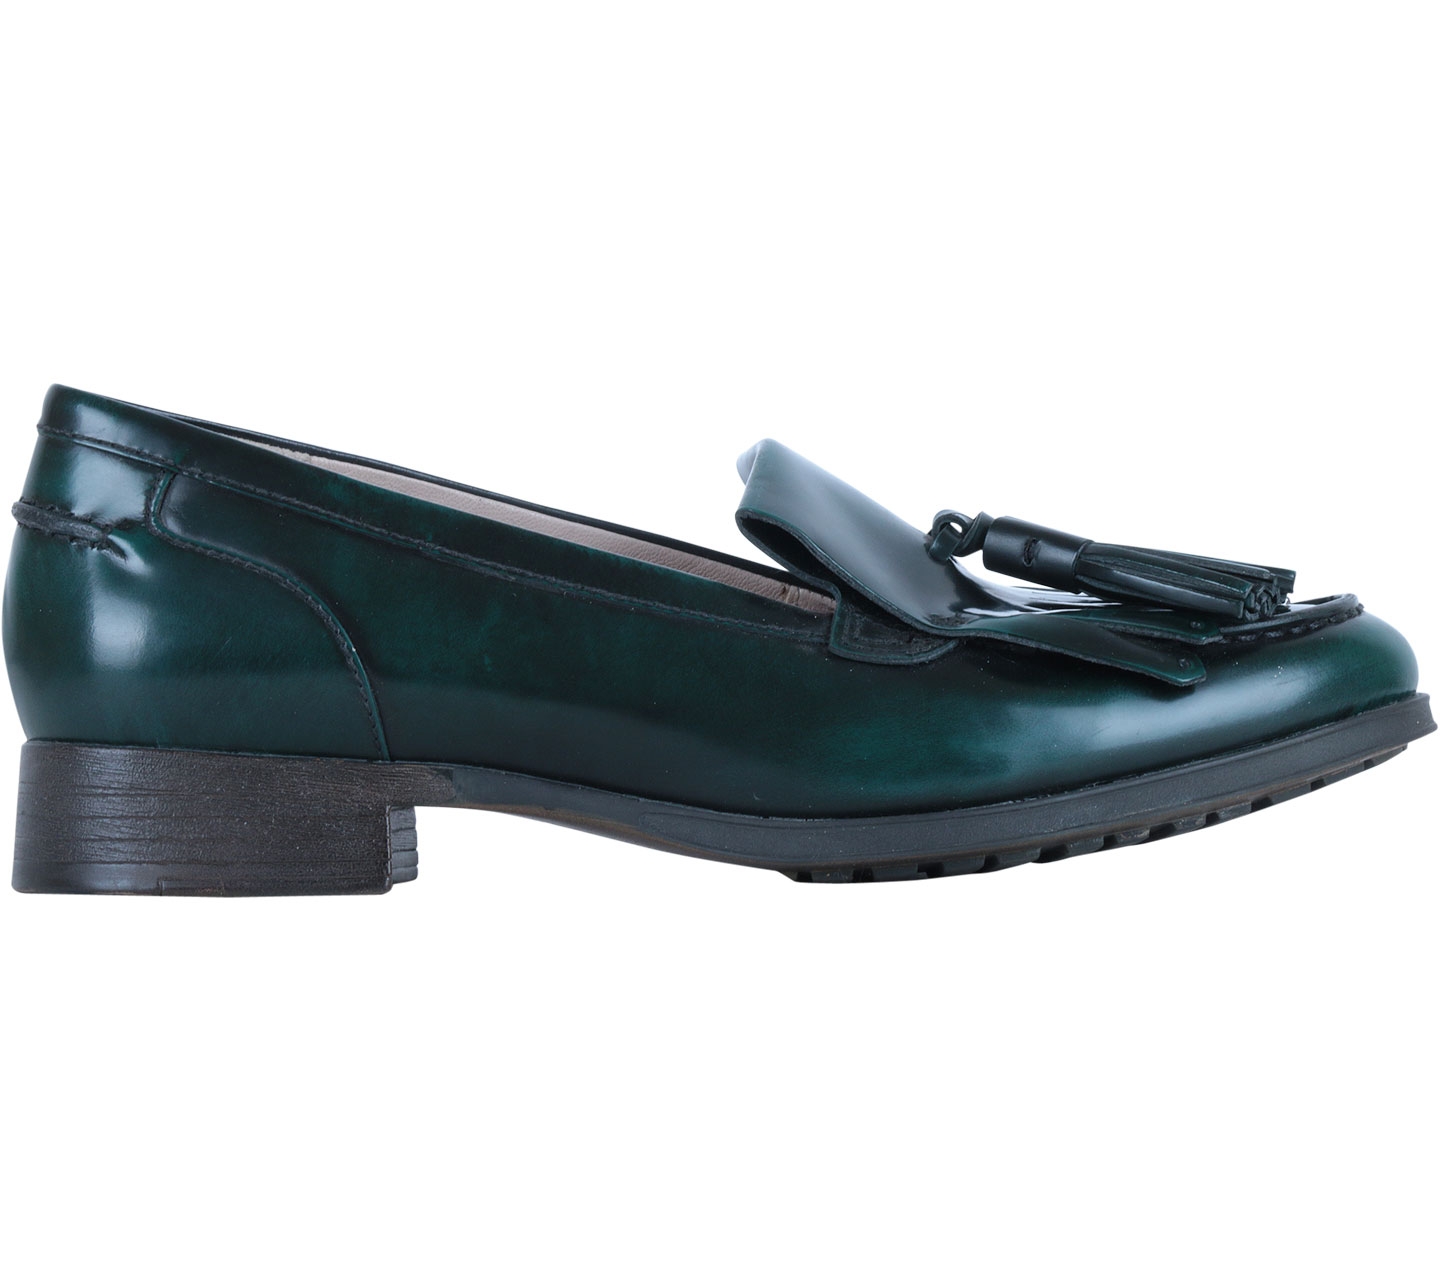 Clarks Green Moccasin Flats